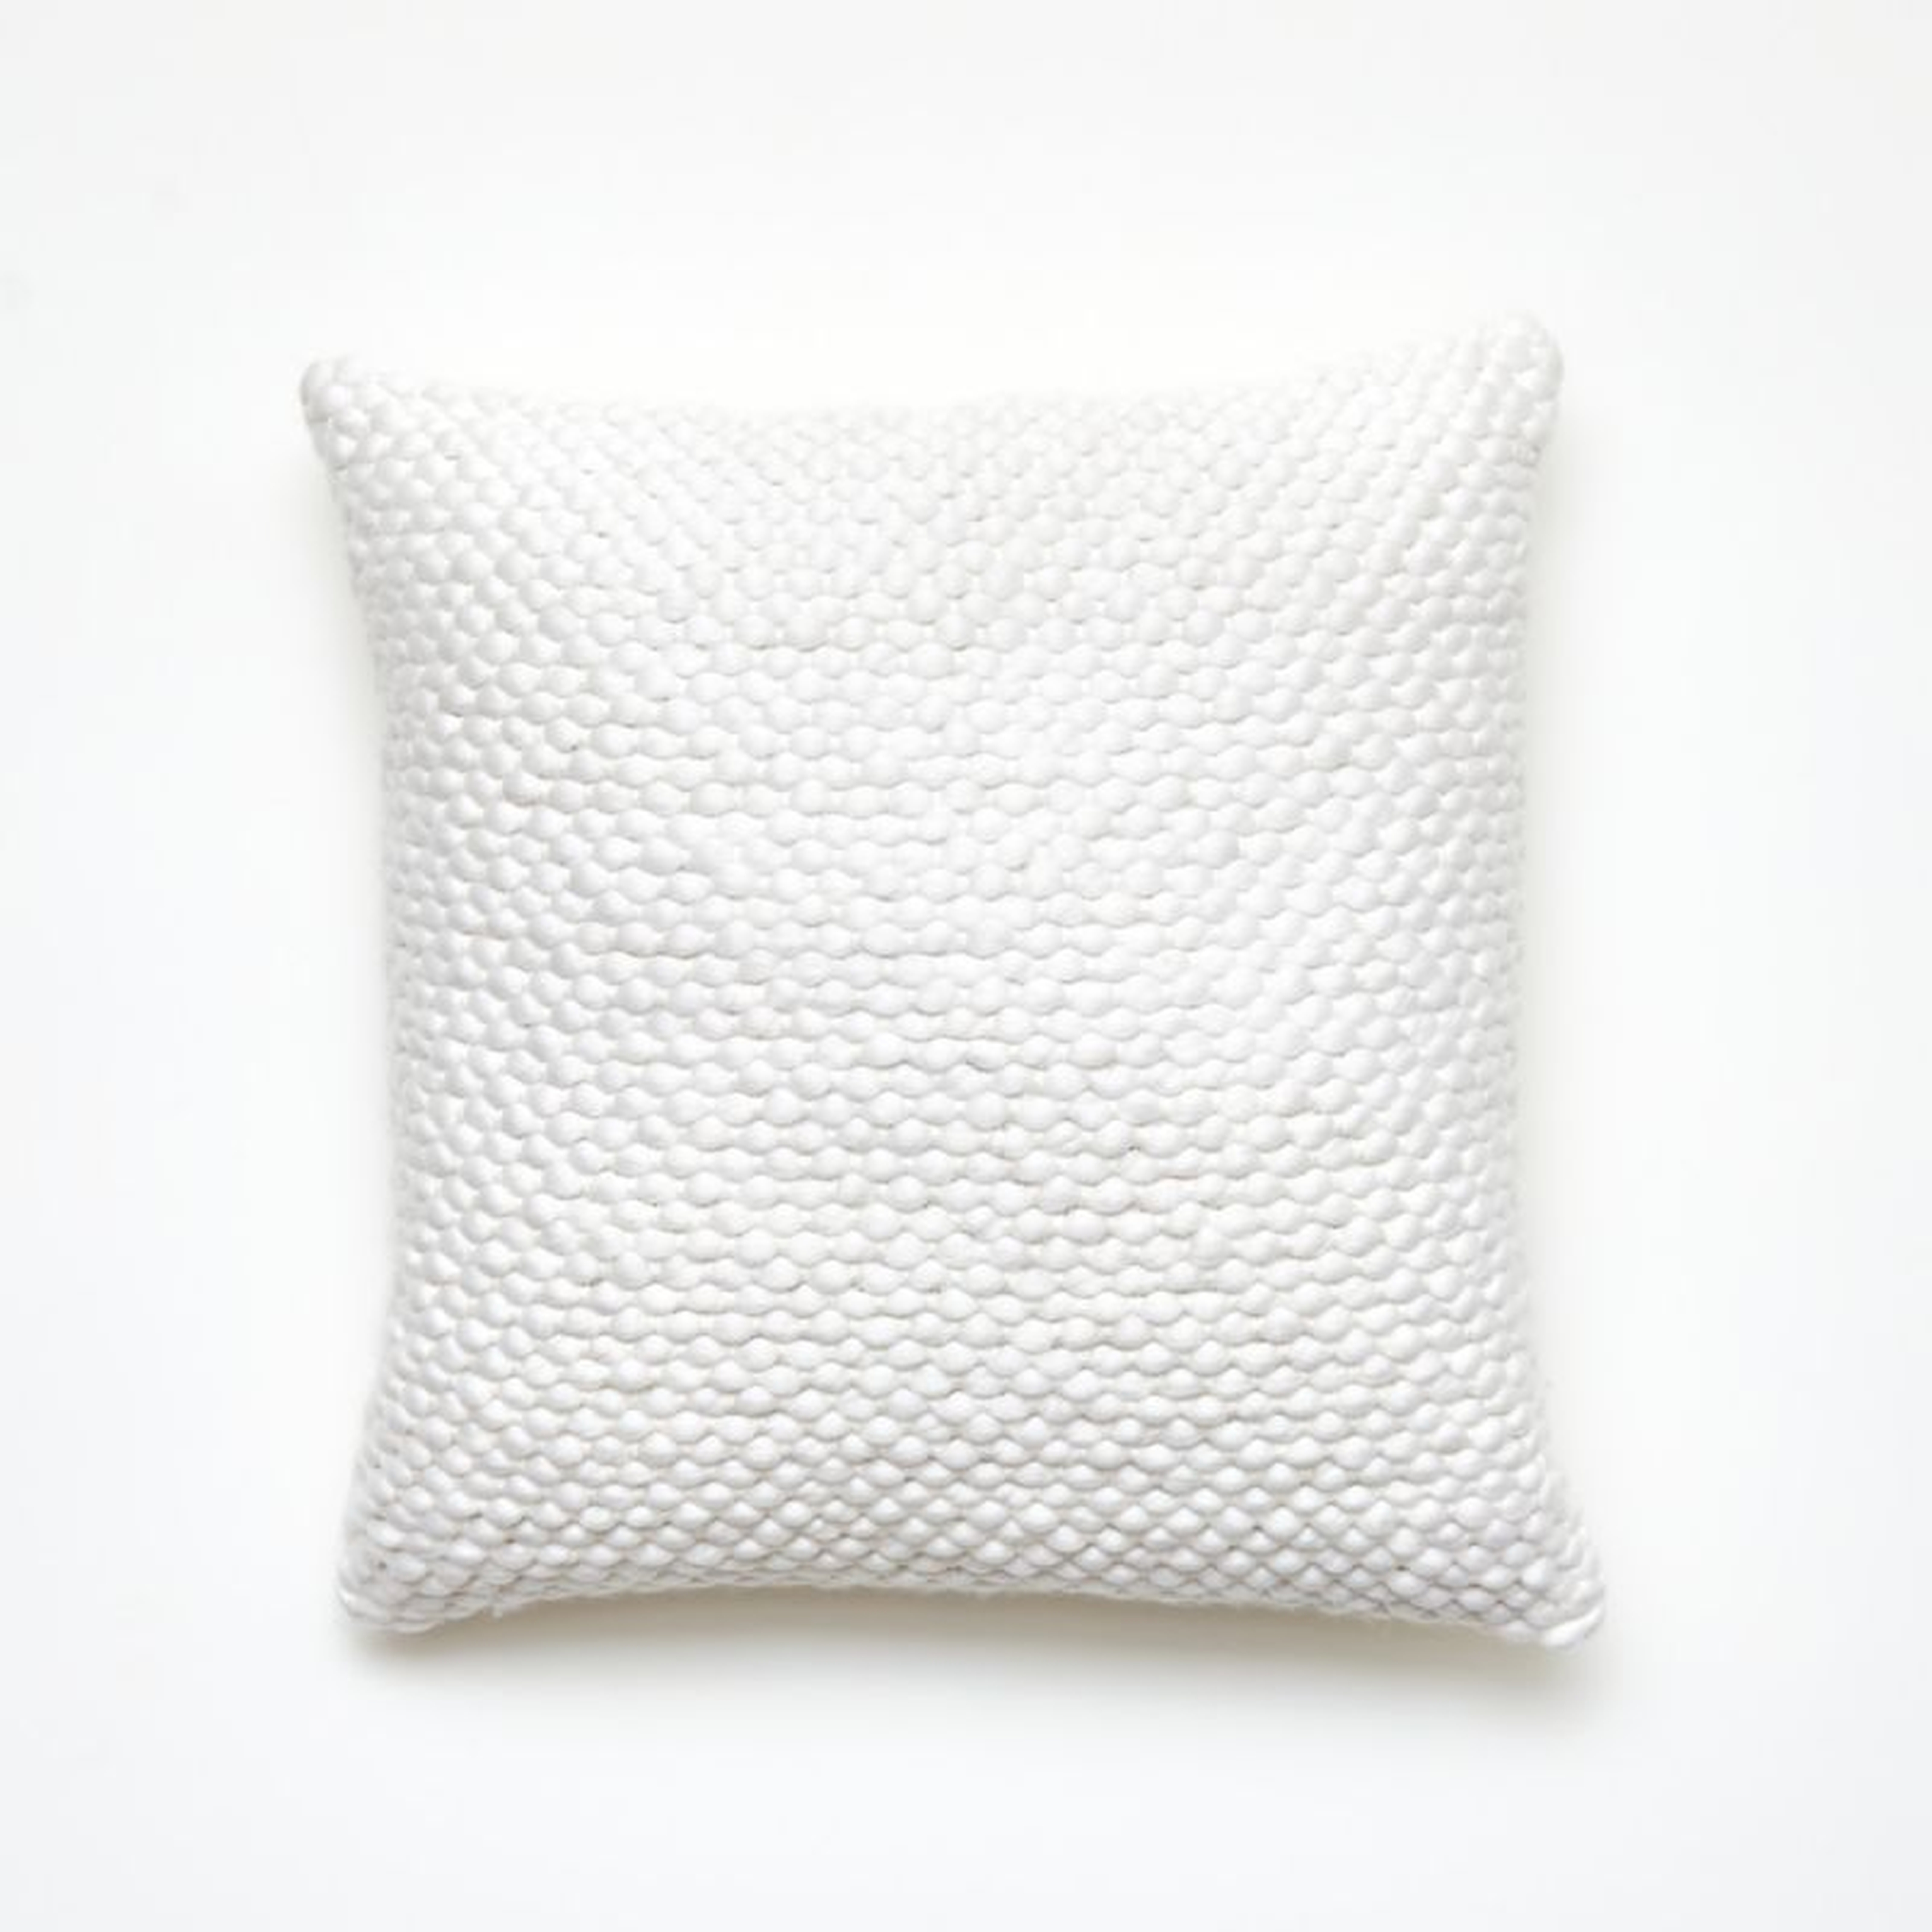 Remy Pillow with Feather-Down Insert, White, 18" x 18" - CB2